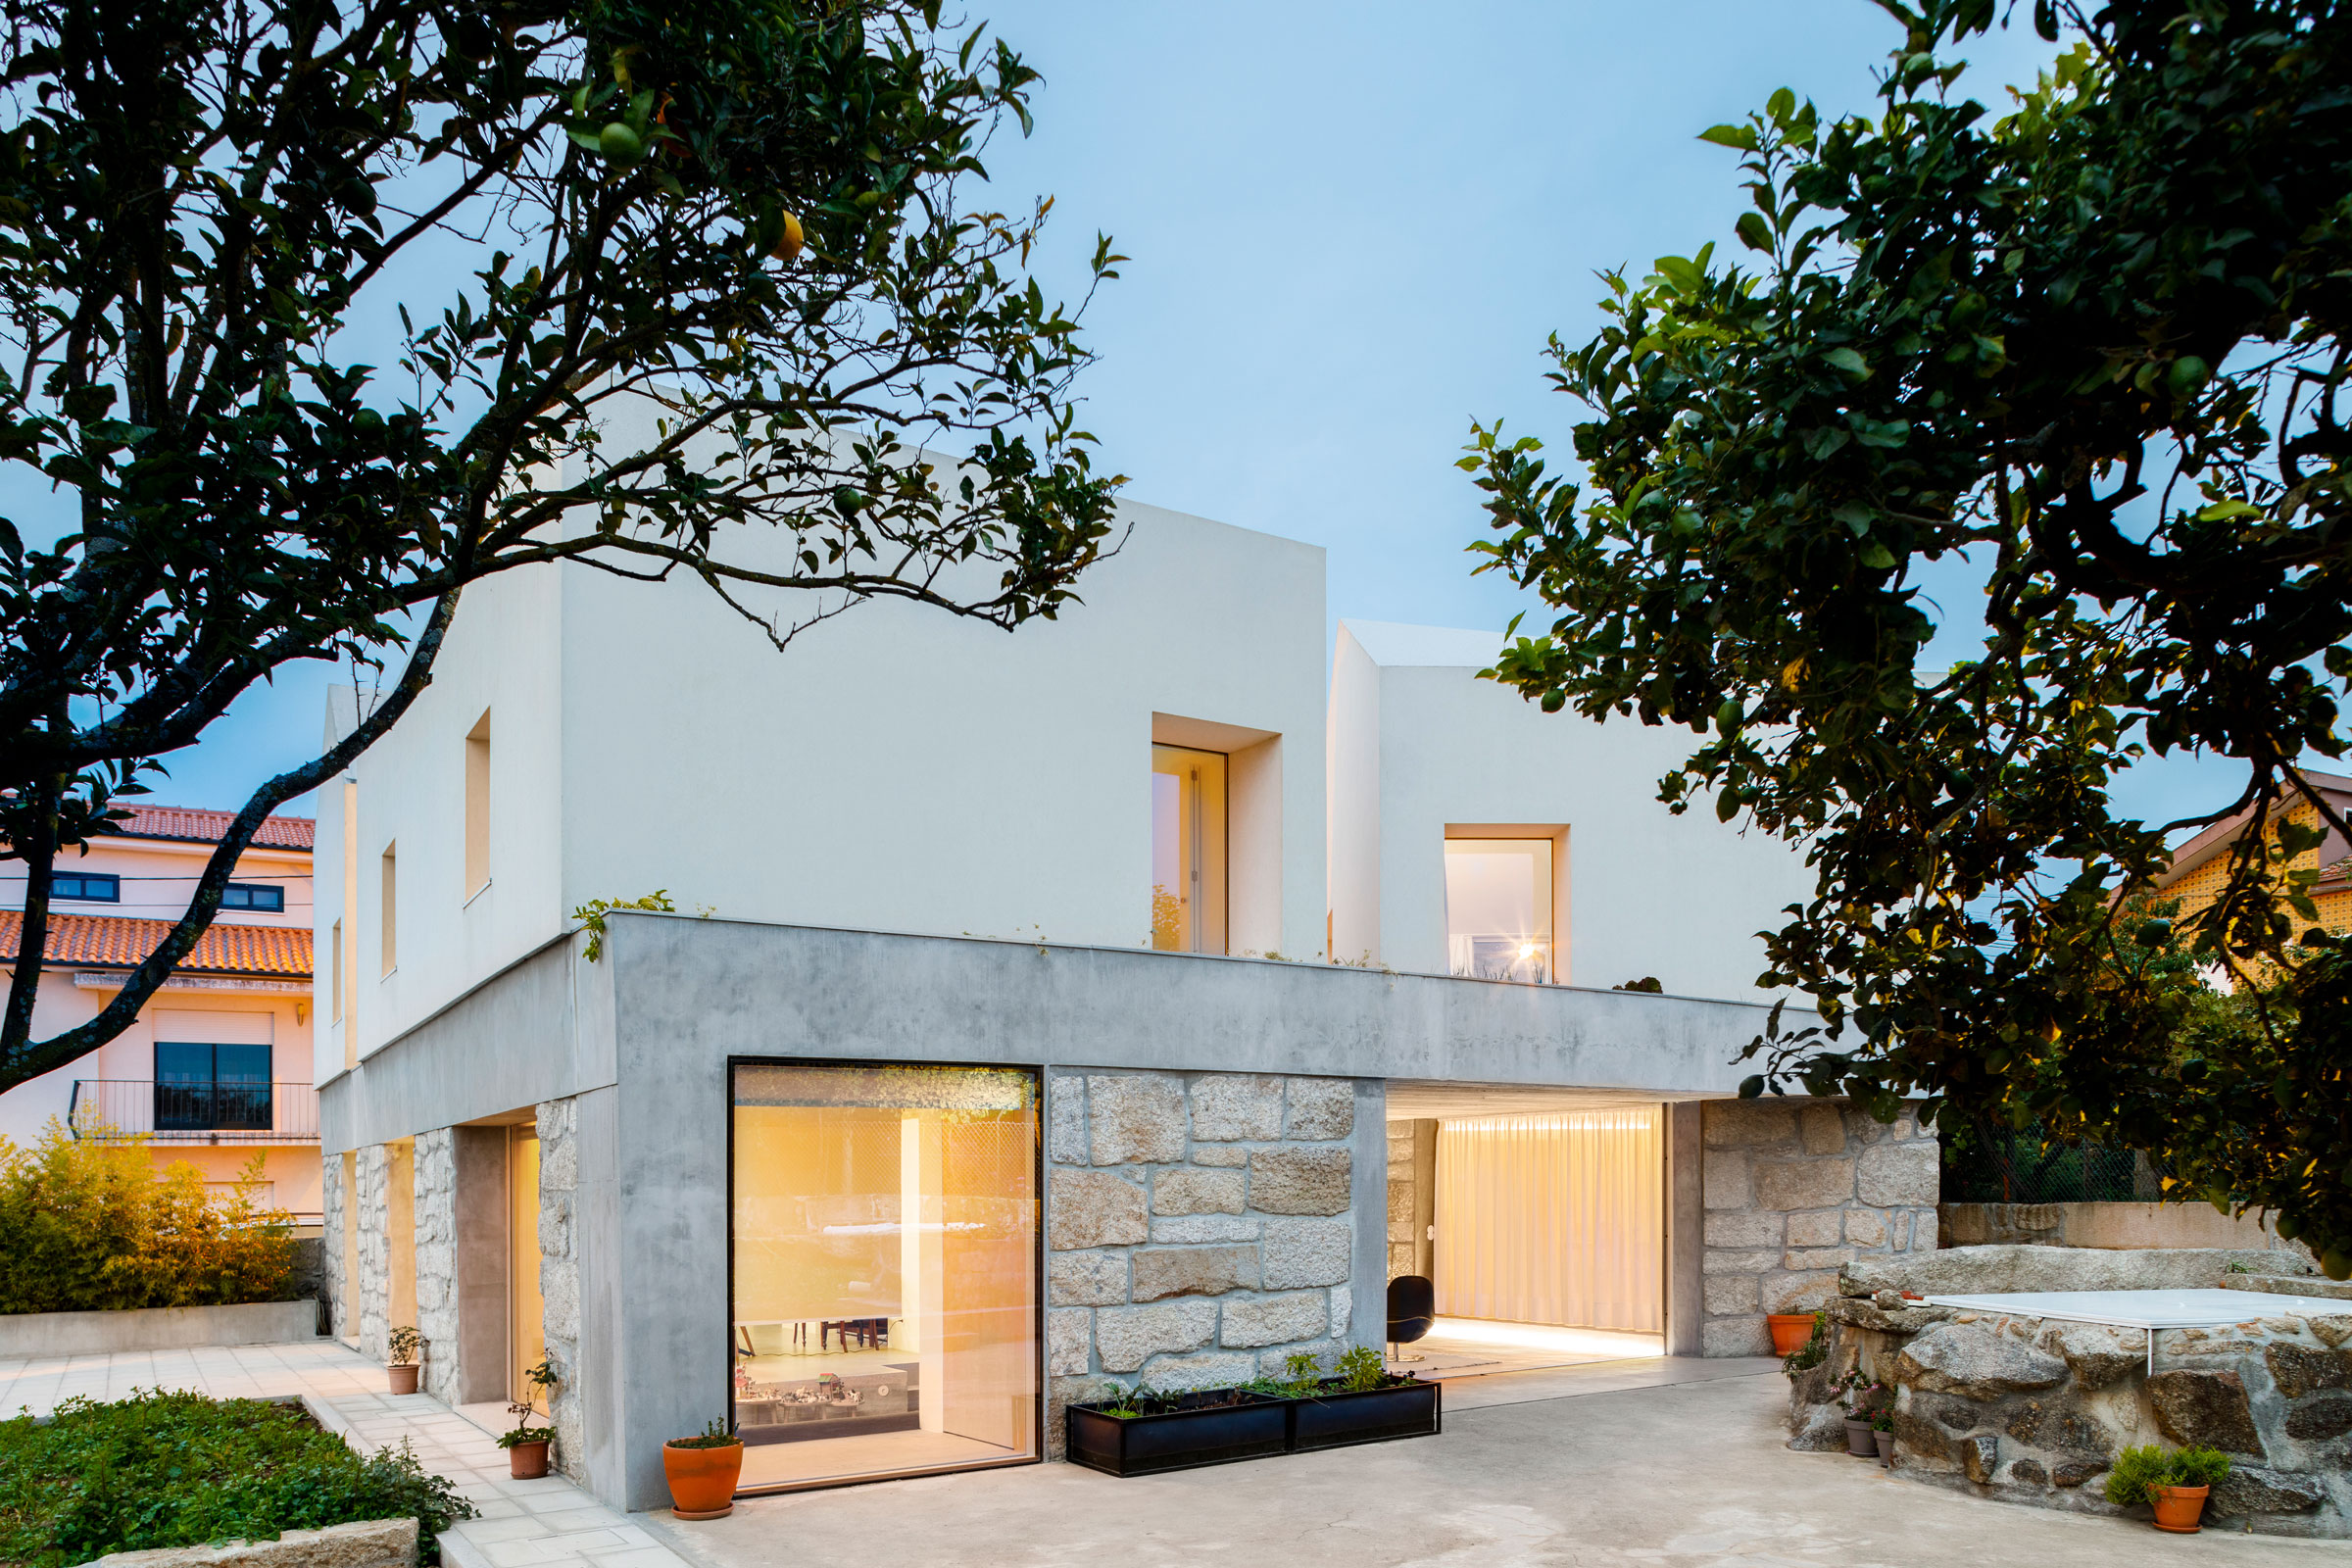 This Paulo Merlini Portugal Farmhouse Remodel was More Than Expected